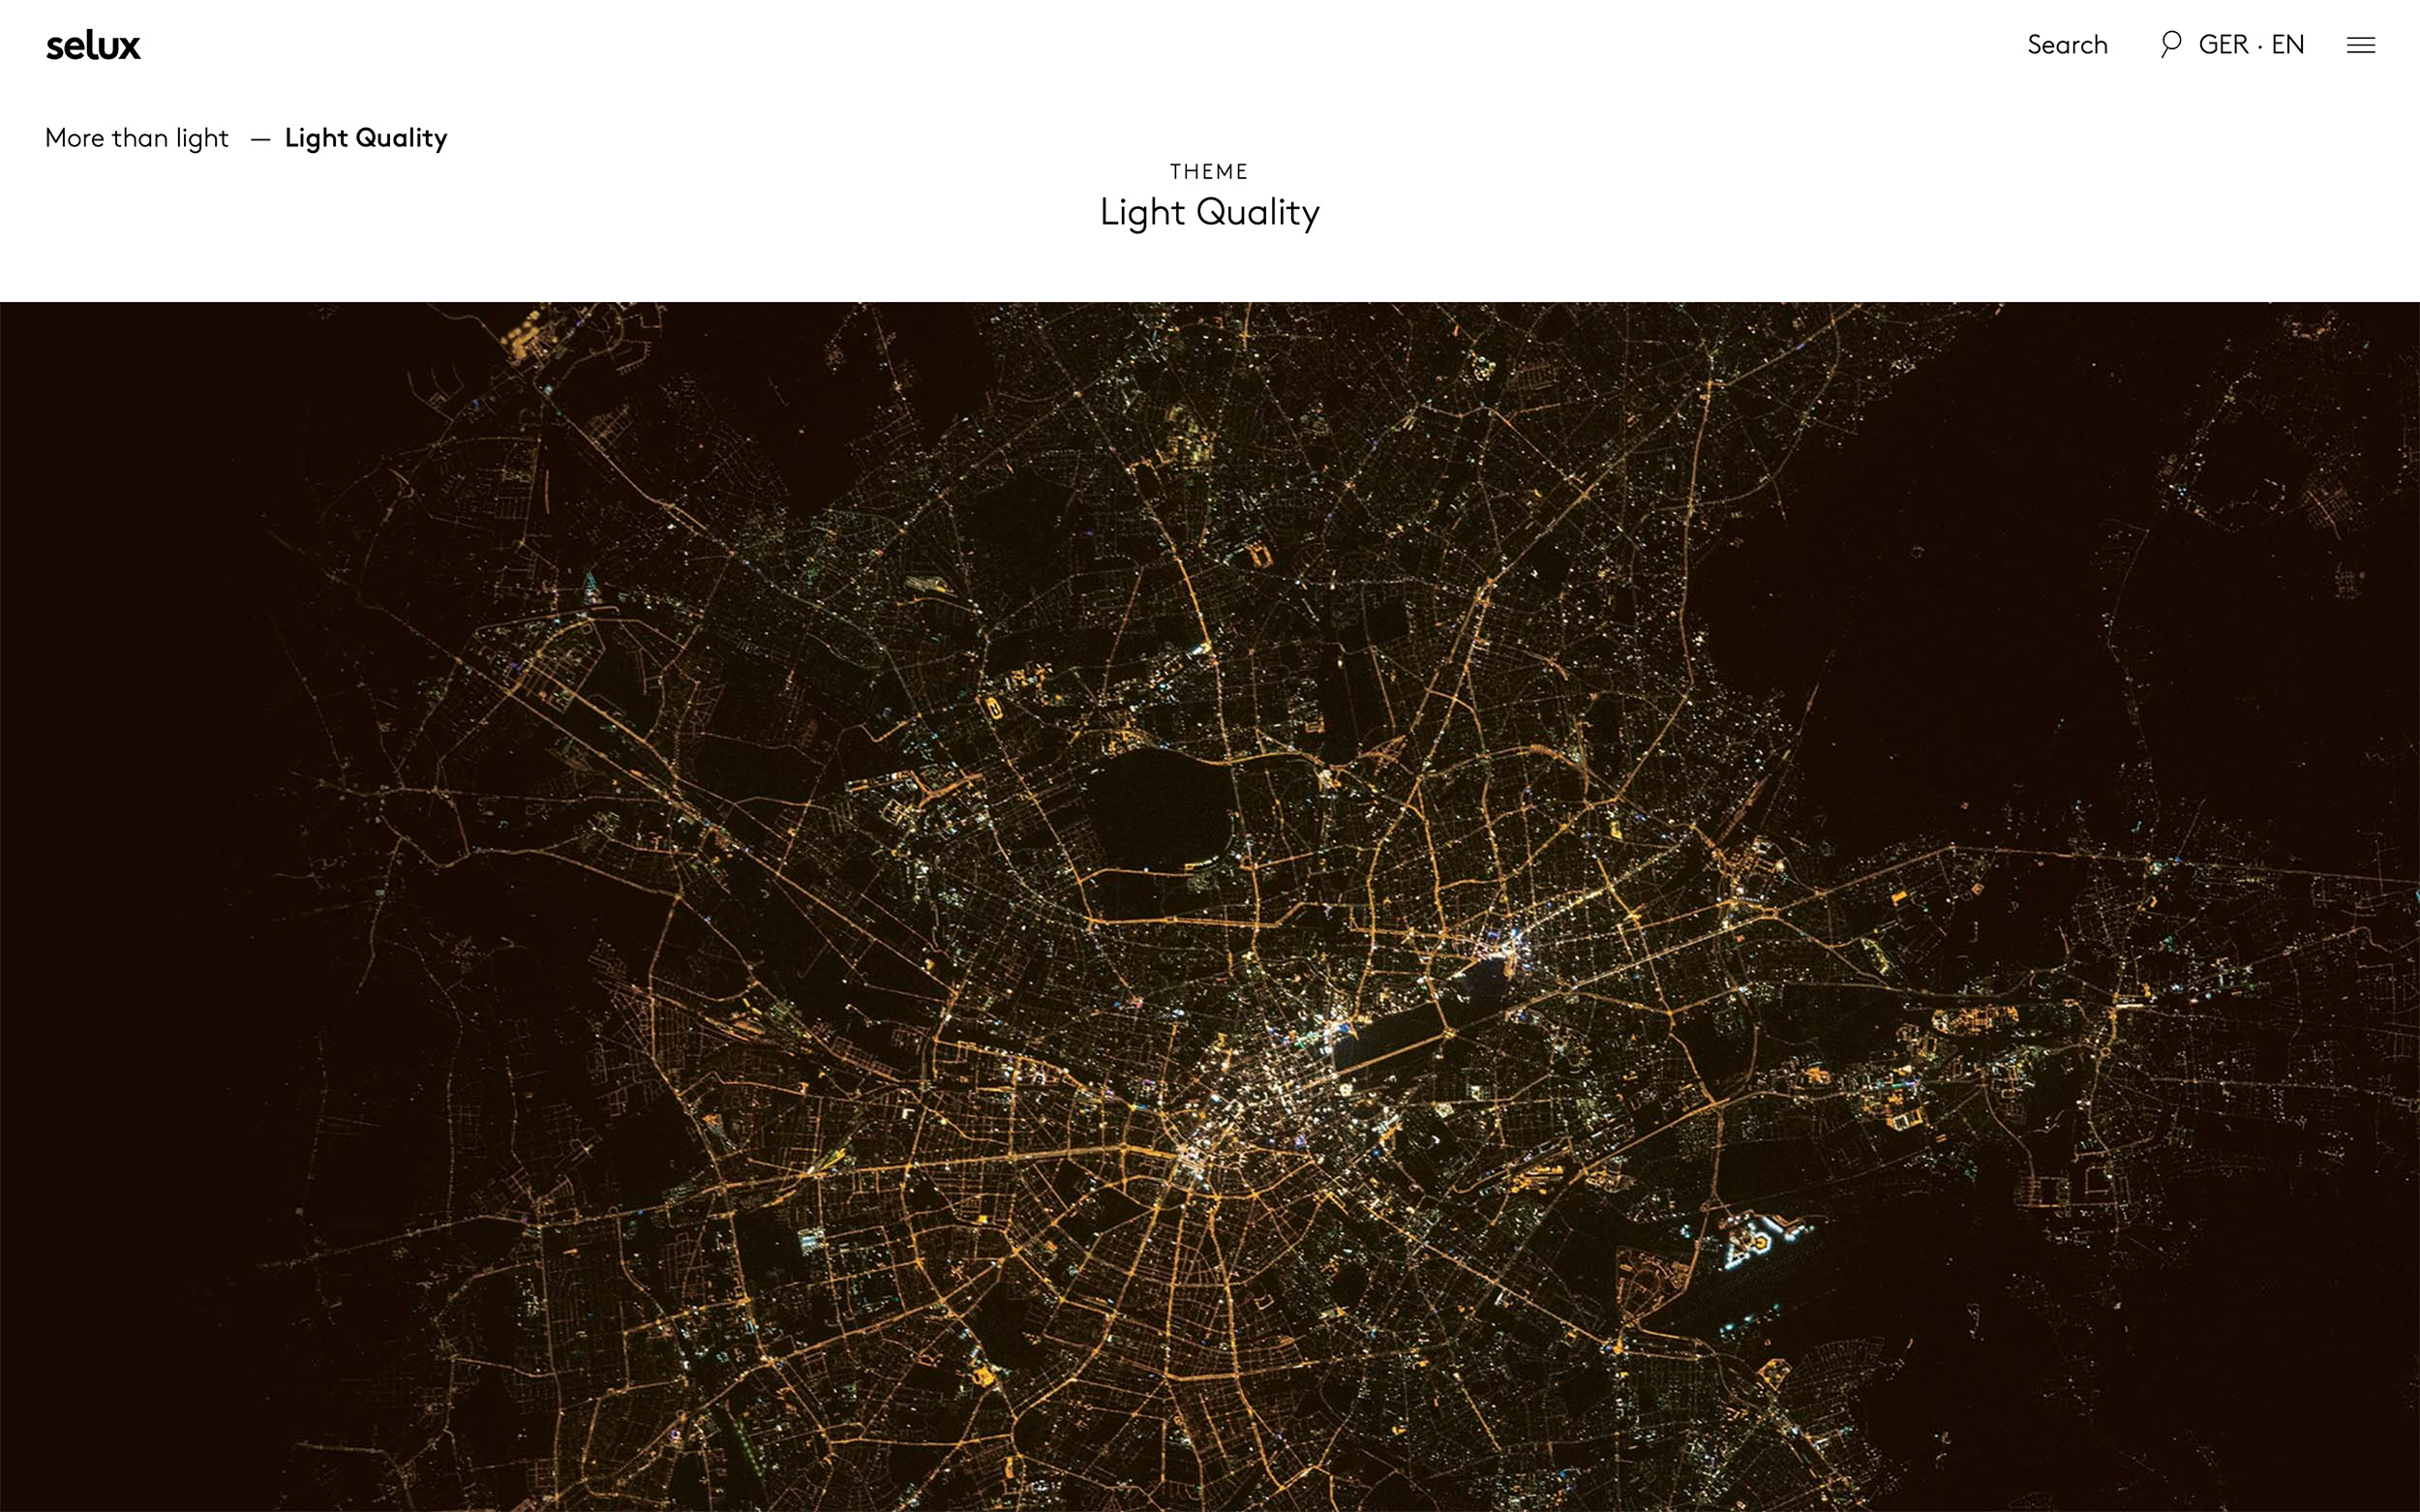 An image showcasing the Theme page titled Light Quality with headline at the top and a full width satellite image of a city during night time underneath.